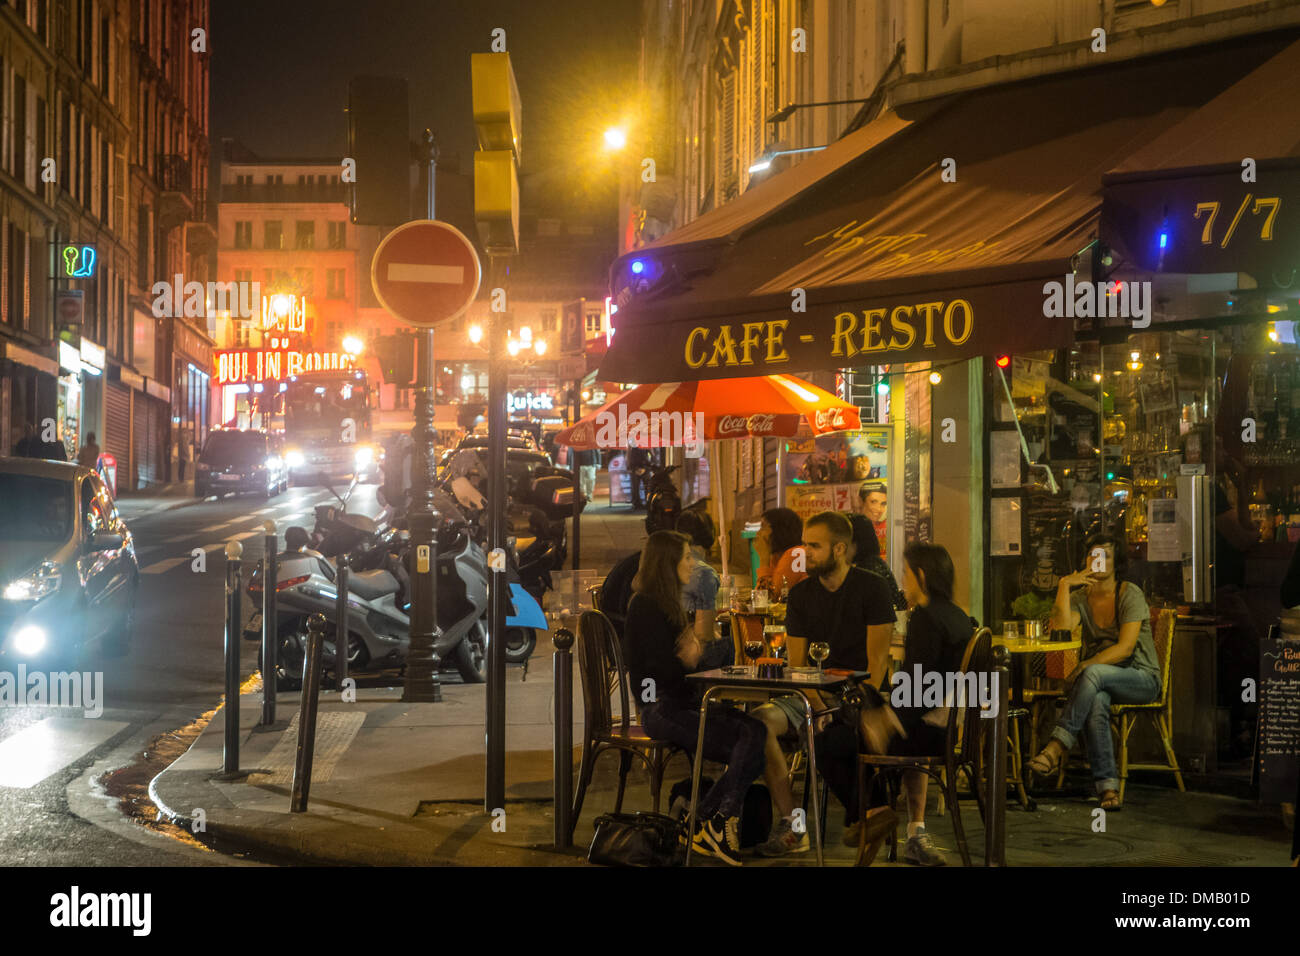 STREET AMBIANCE WITH CUSTOMERS ON THE TERRACE, PARISIAN CAFE RESTAURANT AT NIGHT, RUE BLANCHE, PARIS (75), FRANCE Stock Photo